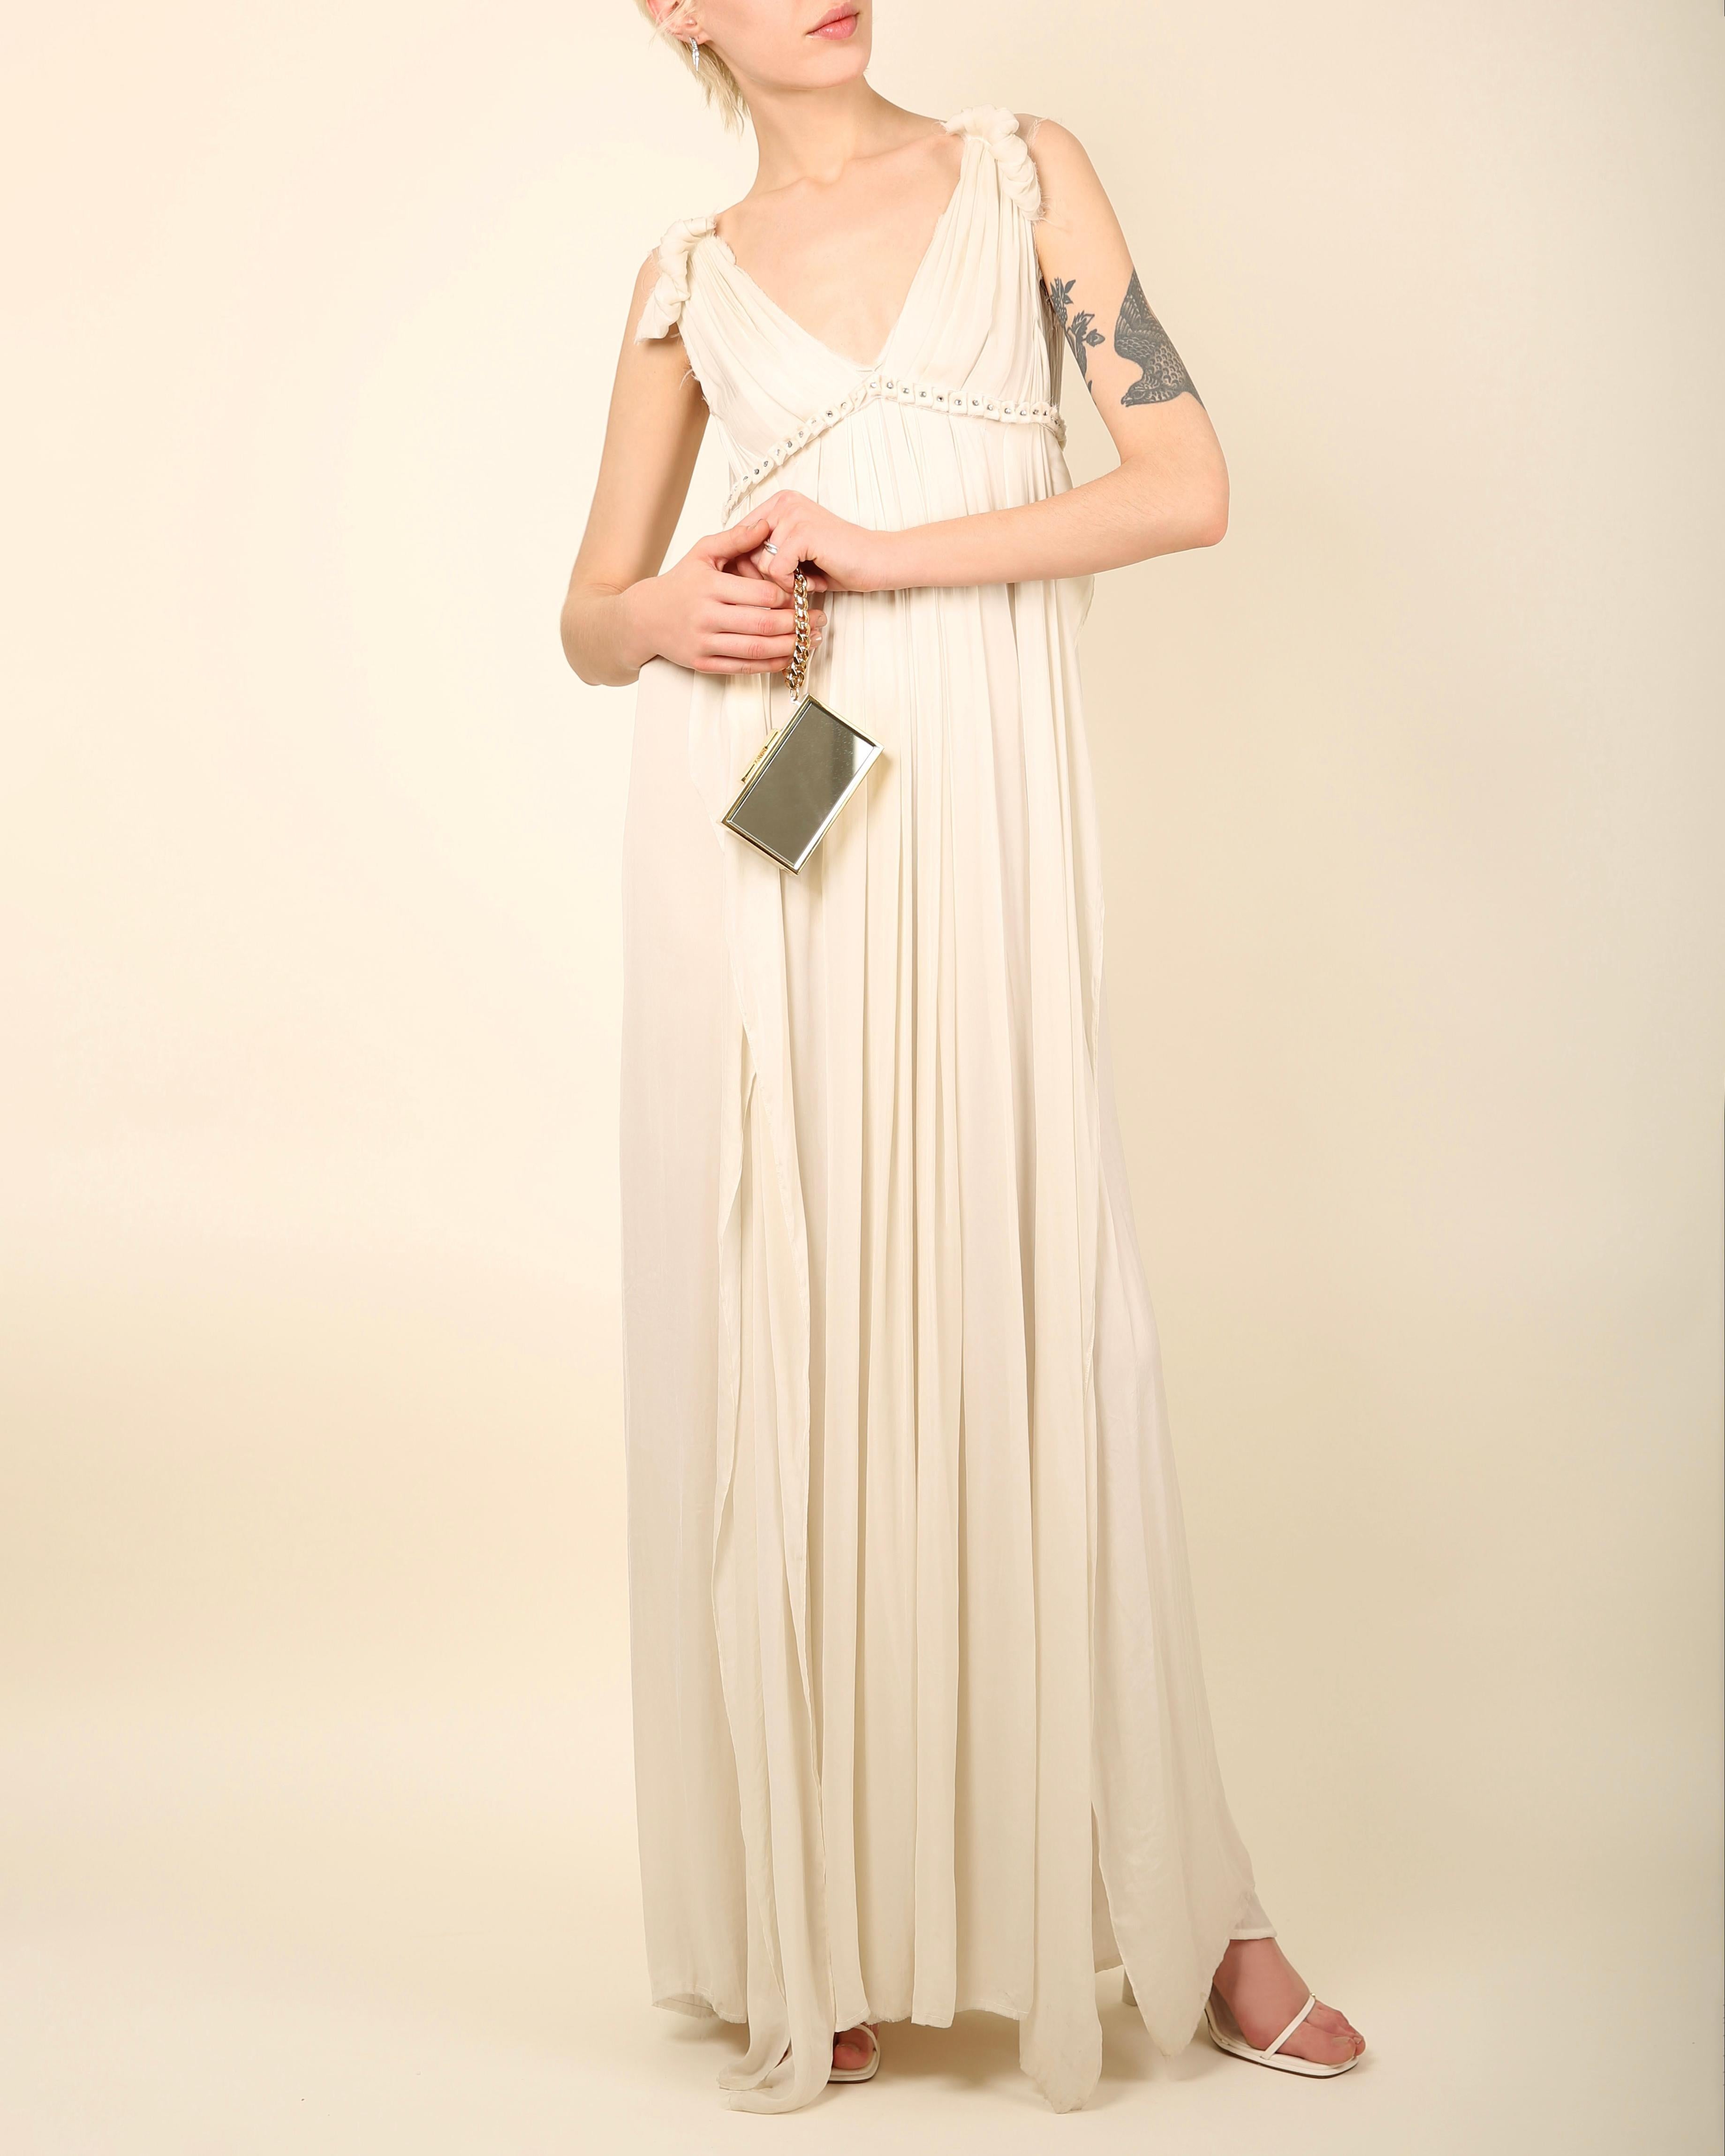 Lanvin Paris Collection Blanche Resort 2011
A beautiful floor length grecian style loose fitting ivory gown with crystal embellished waist band that would work beautifully as wedding or evening dress
Double layered dress that falls in ripples of